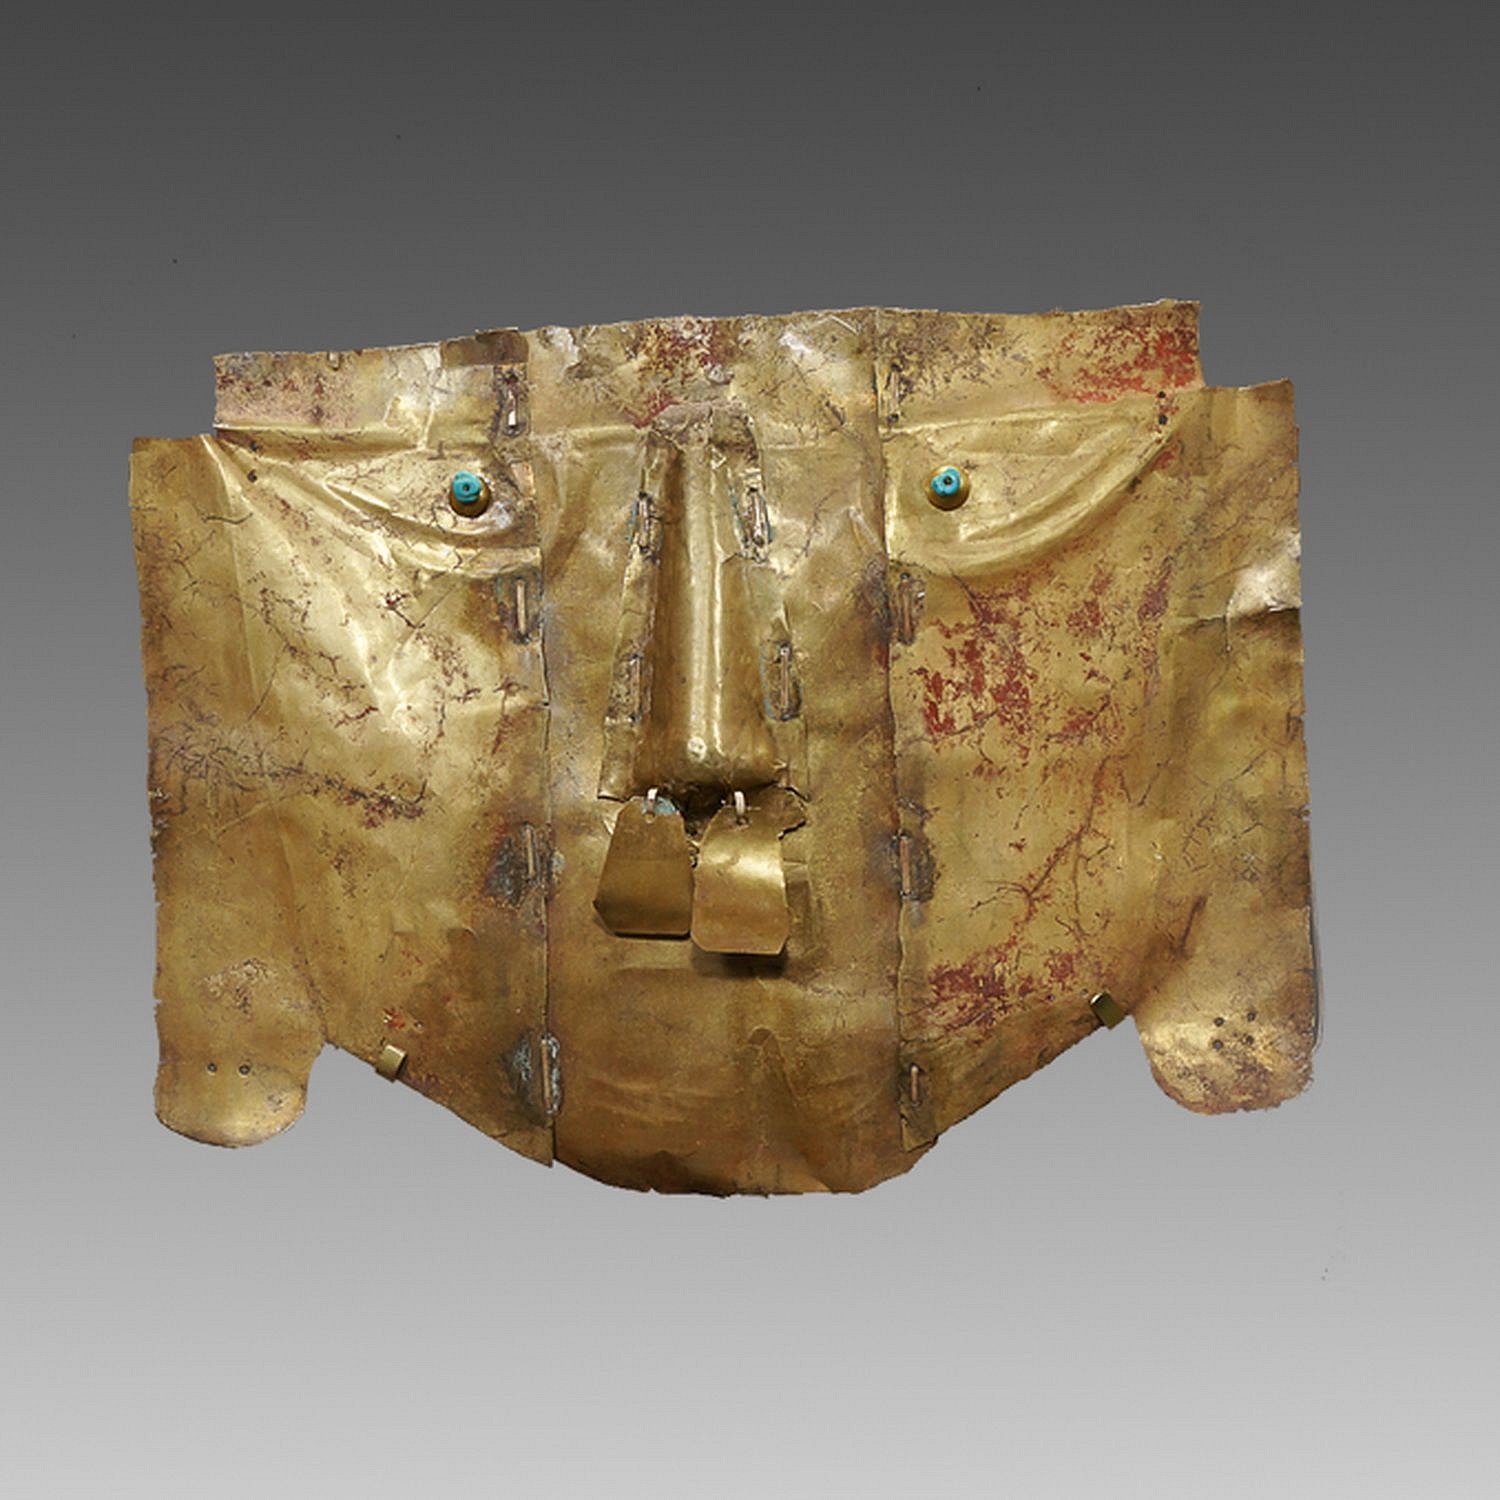 Peru, Sican Gold Mask of the Third Type
A classic type of mask from the 3rd Phase, constructed in 3 parts and held together by ancient gold staples.  The eyes have turquoise bead pupils with gold hemispheres.  Traces of the original cinnabar remain.  Sicán masks are discussed in THE ART OF PRECOLUMBIAN GOLD - The Jan Mitchell Collection, page 66 - see example(s).  The Sicán culture was extremely wealthy and was known to have built the largest city in the Americas, Chan- Chan, outside of the modern city of Trujillo.  The Sicán were excellent gold workers, and when the Incas conquered them, they brought the metalsmiths to the Inca capital of Cuzco.  Similar masks are illustrated in THE GOLD OF PERU-MUJICA GAILLO Collection. Ex. Private New York Collector.
Media: Metal
Dimensions: Height: 7.75" x Width 10 1/8"
&bull;SOLD
n4001